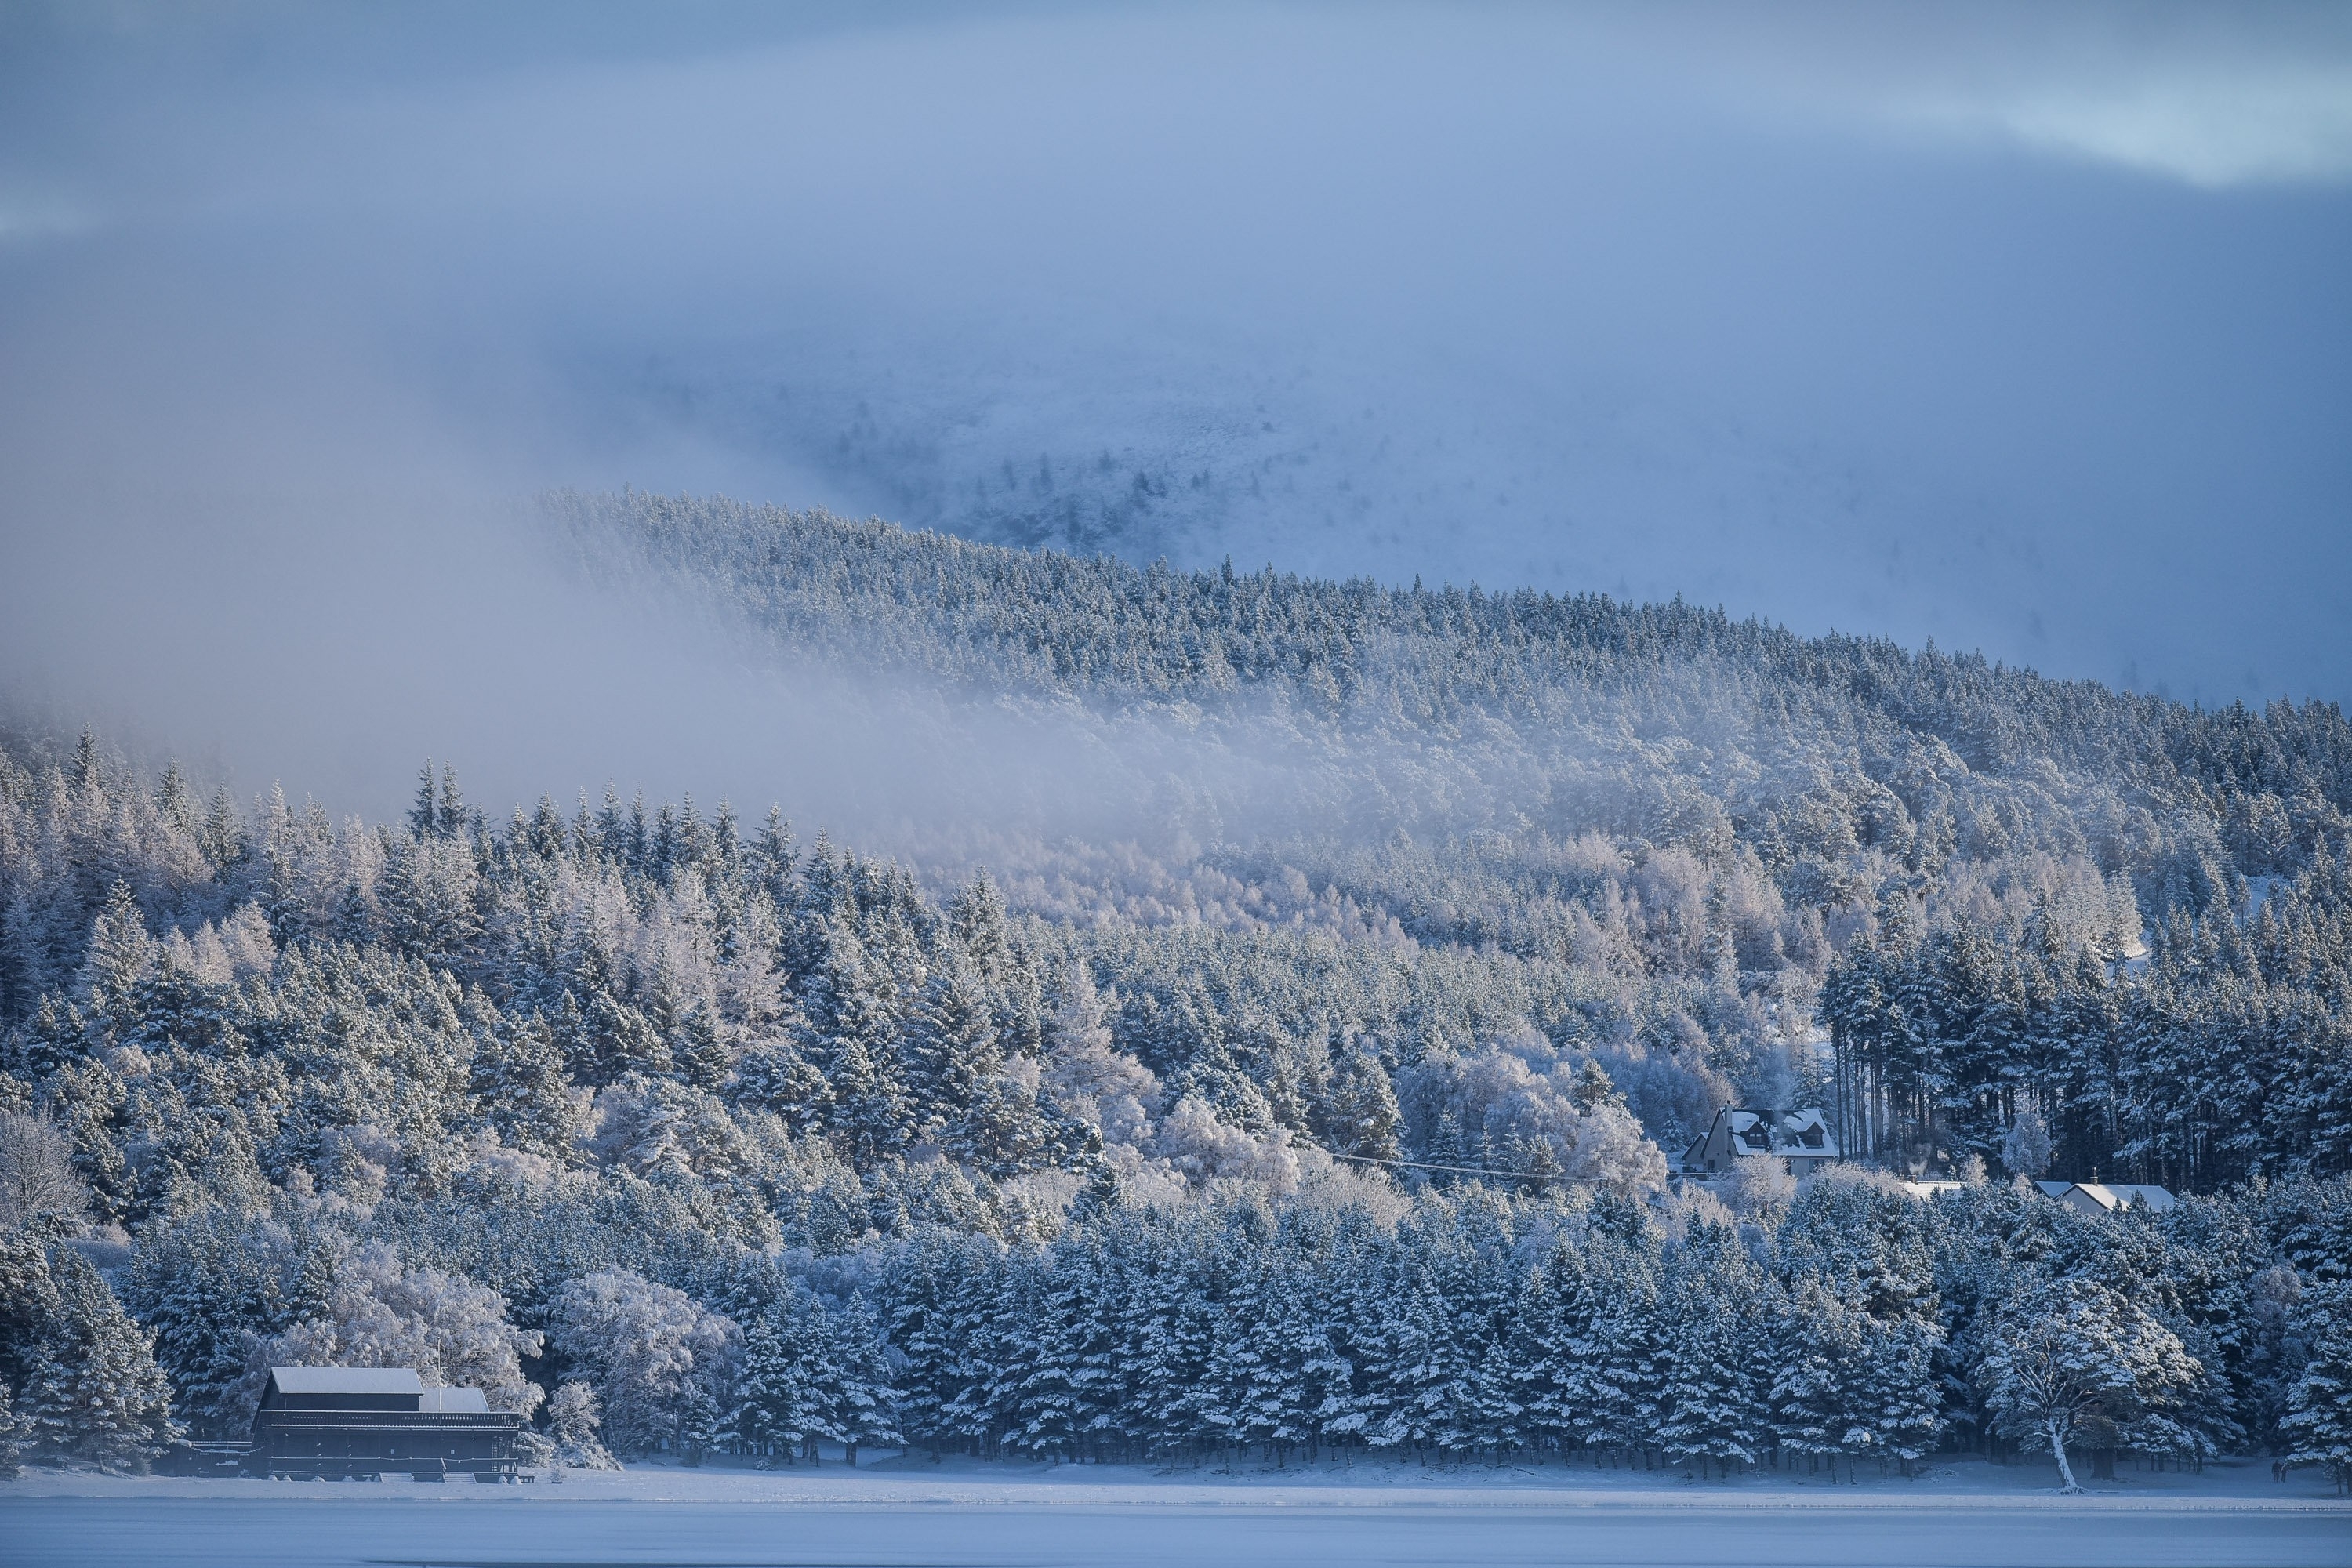 A cabin is surounded by snow dusted trees on the shore of Loch Morlich near Aviemore, Scotland on December 14 2015. Last night, Sunday, Scotland's coldest temperature for this Winter was recorded in Dalwhinnie at -8.7C. Up to 15cm of snow fell in Aviemore overnight and local schools were closed.